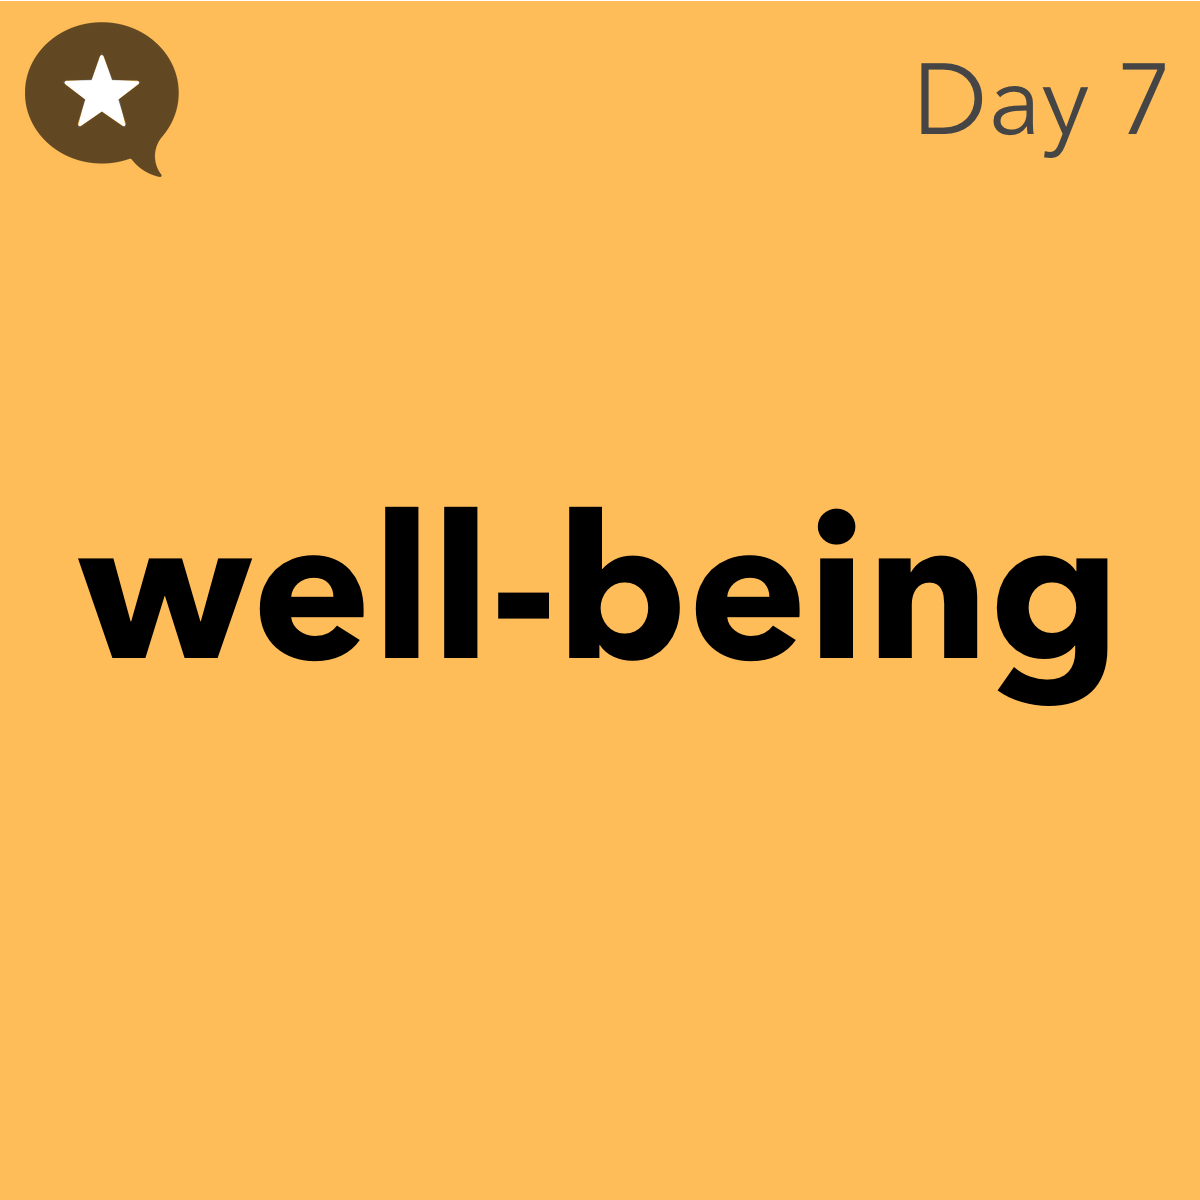 day 7 well-being graphic